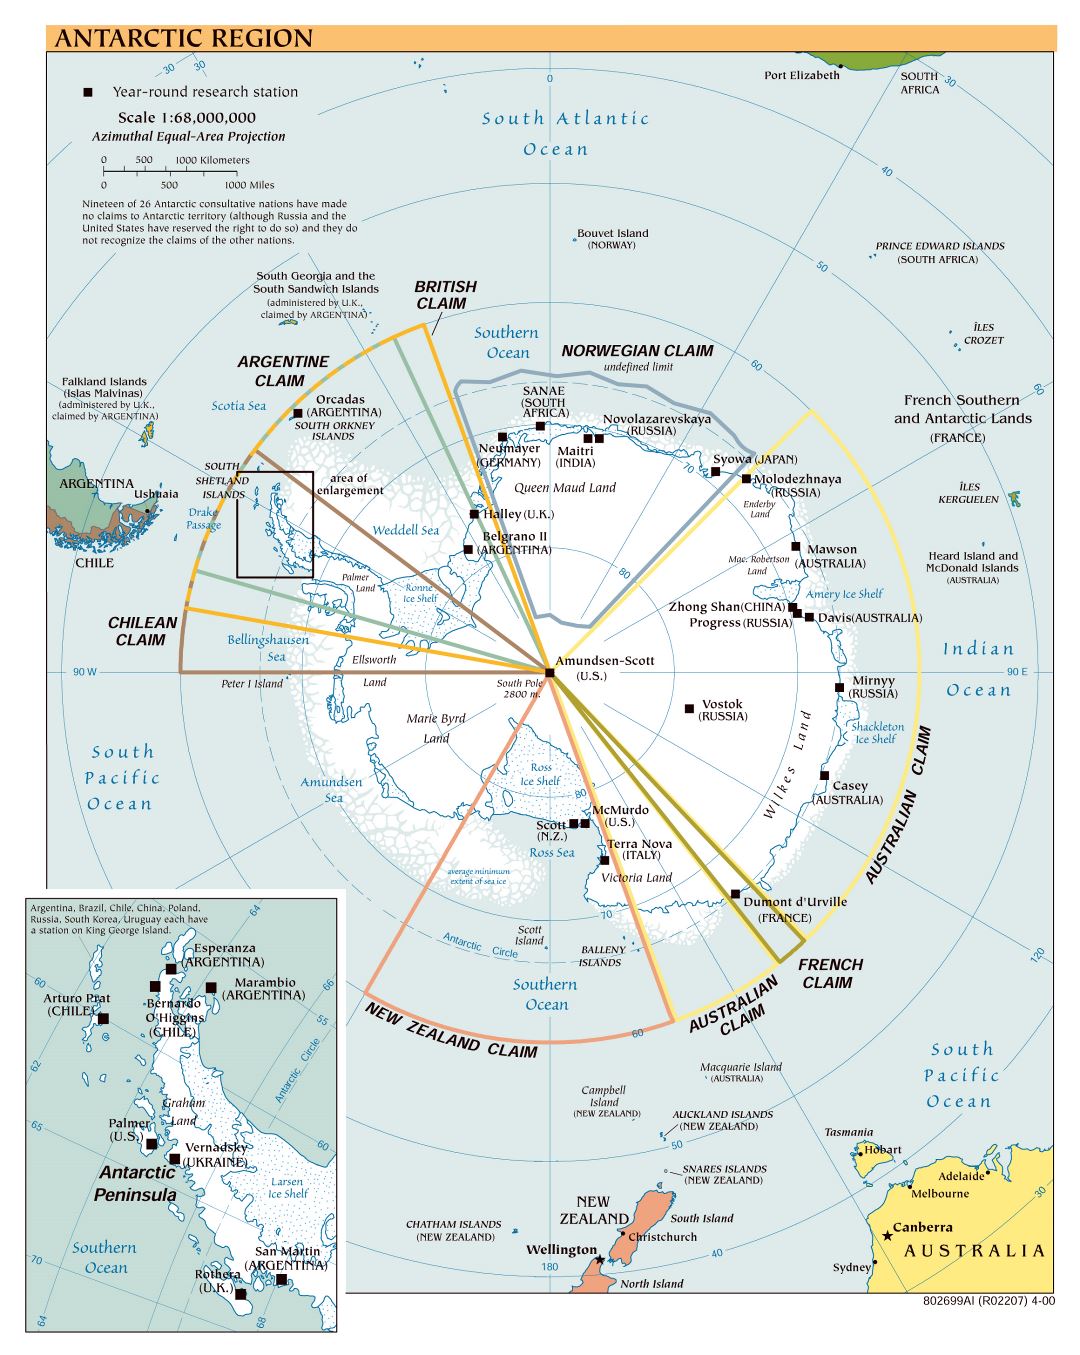 Large scale political map of Antarctic Region - 2000